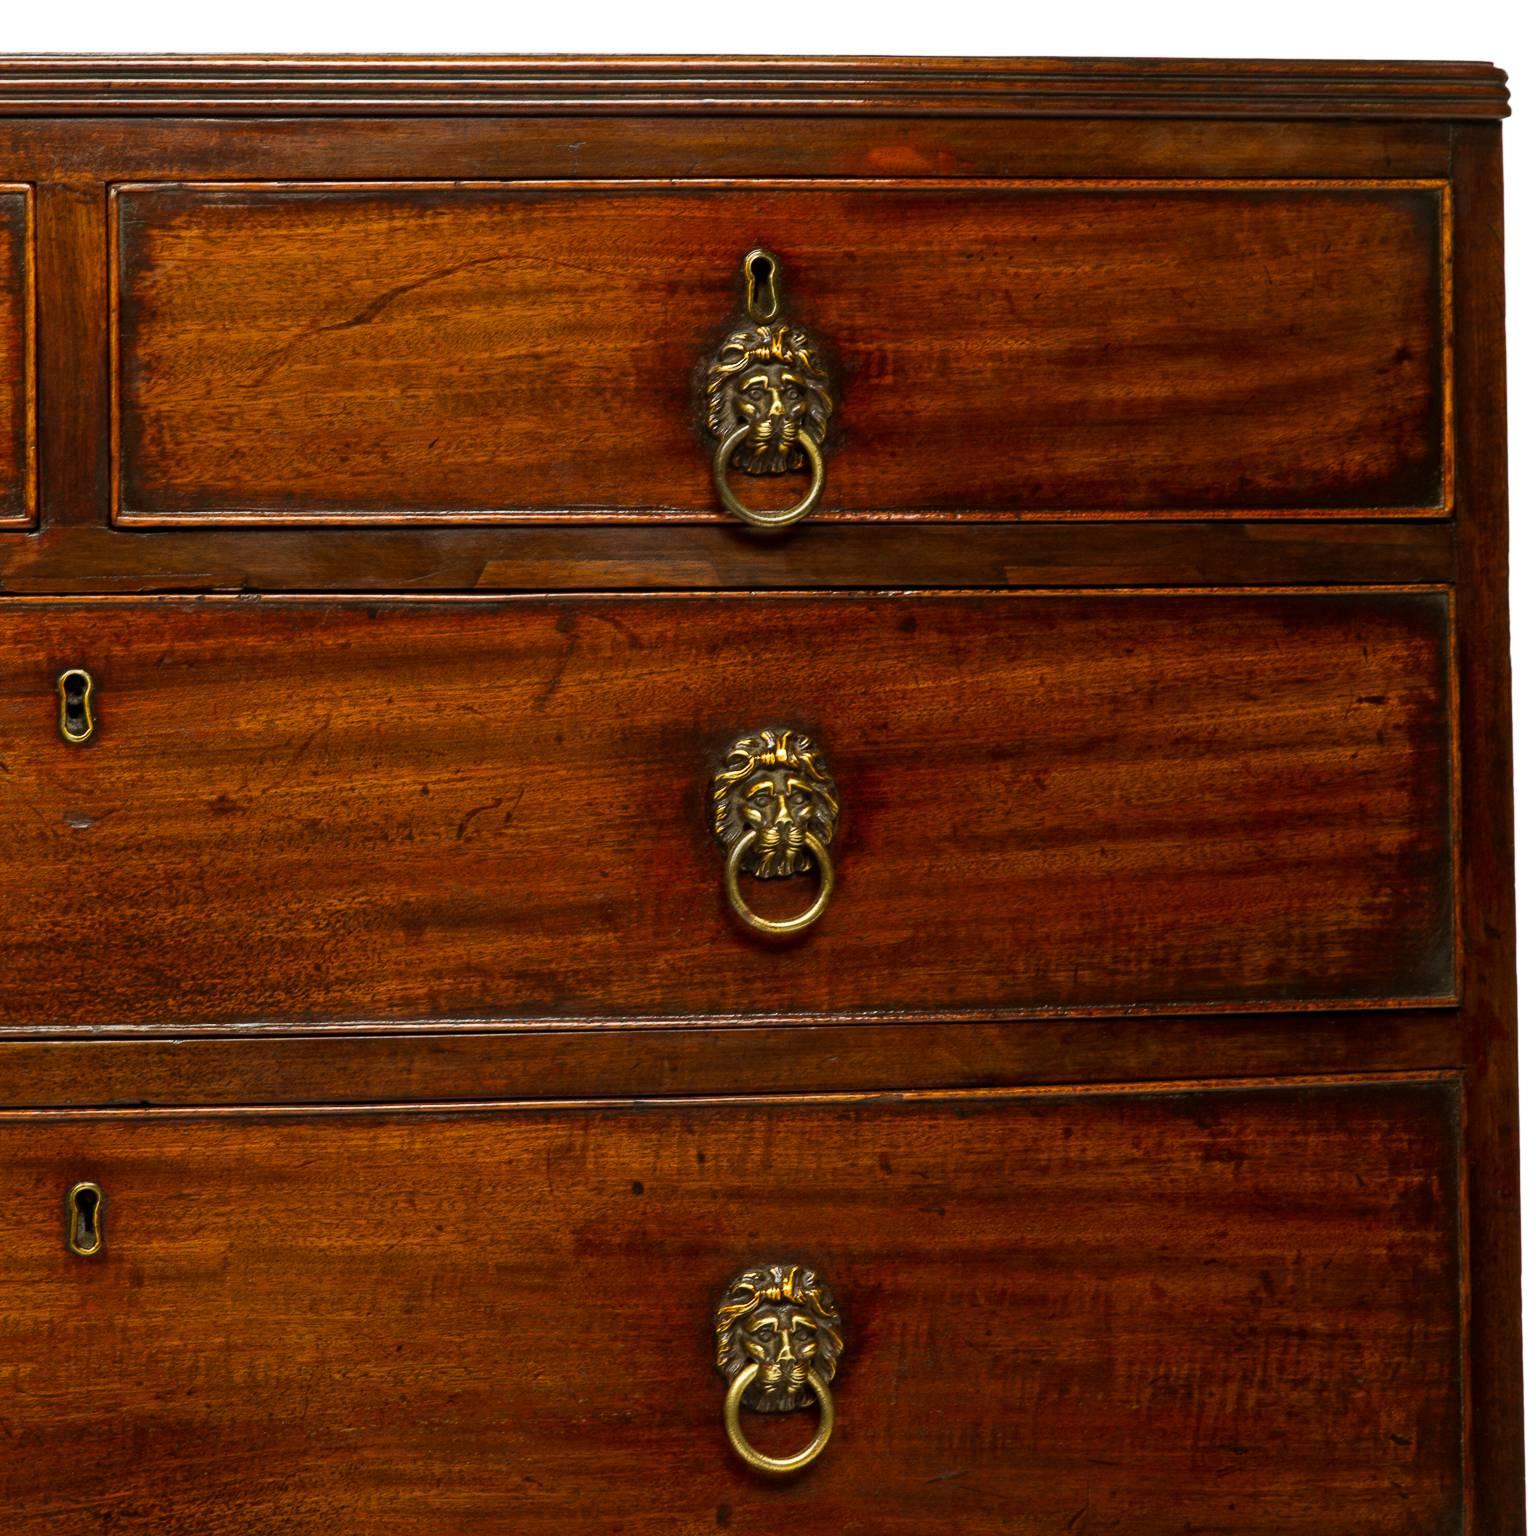 Georgian mahogany bow front chest of drawers, circa 1780. Classic proportions with two small drawers over three long drawers of graduated depth. Fine quality timber of particularly good color, veneered top and drawer fronts, solid mahogany sides.